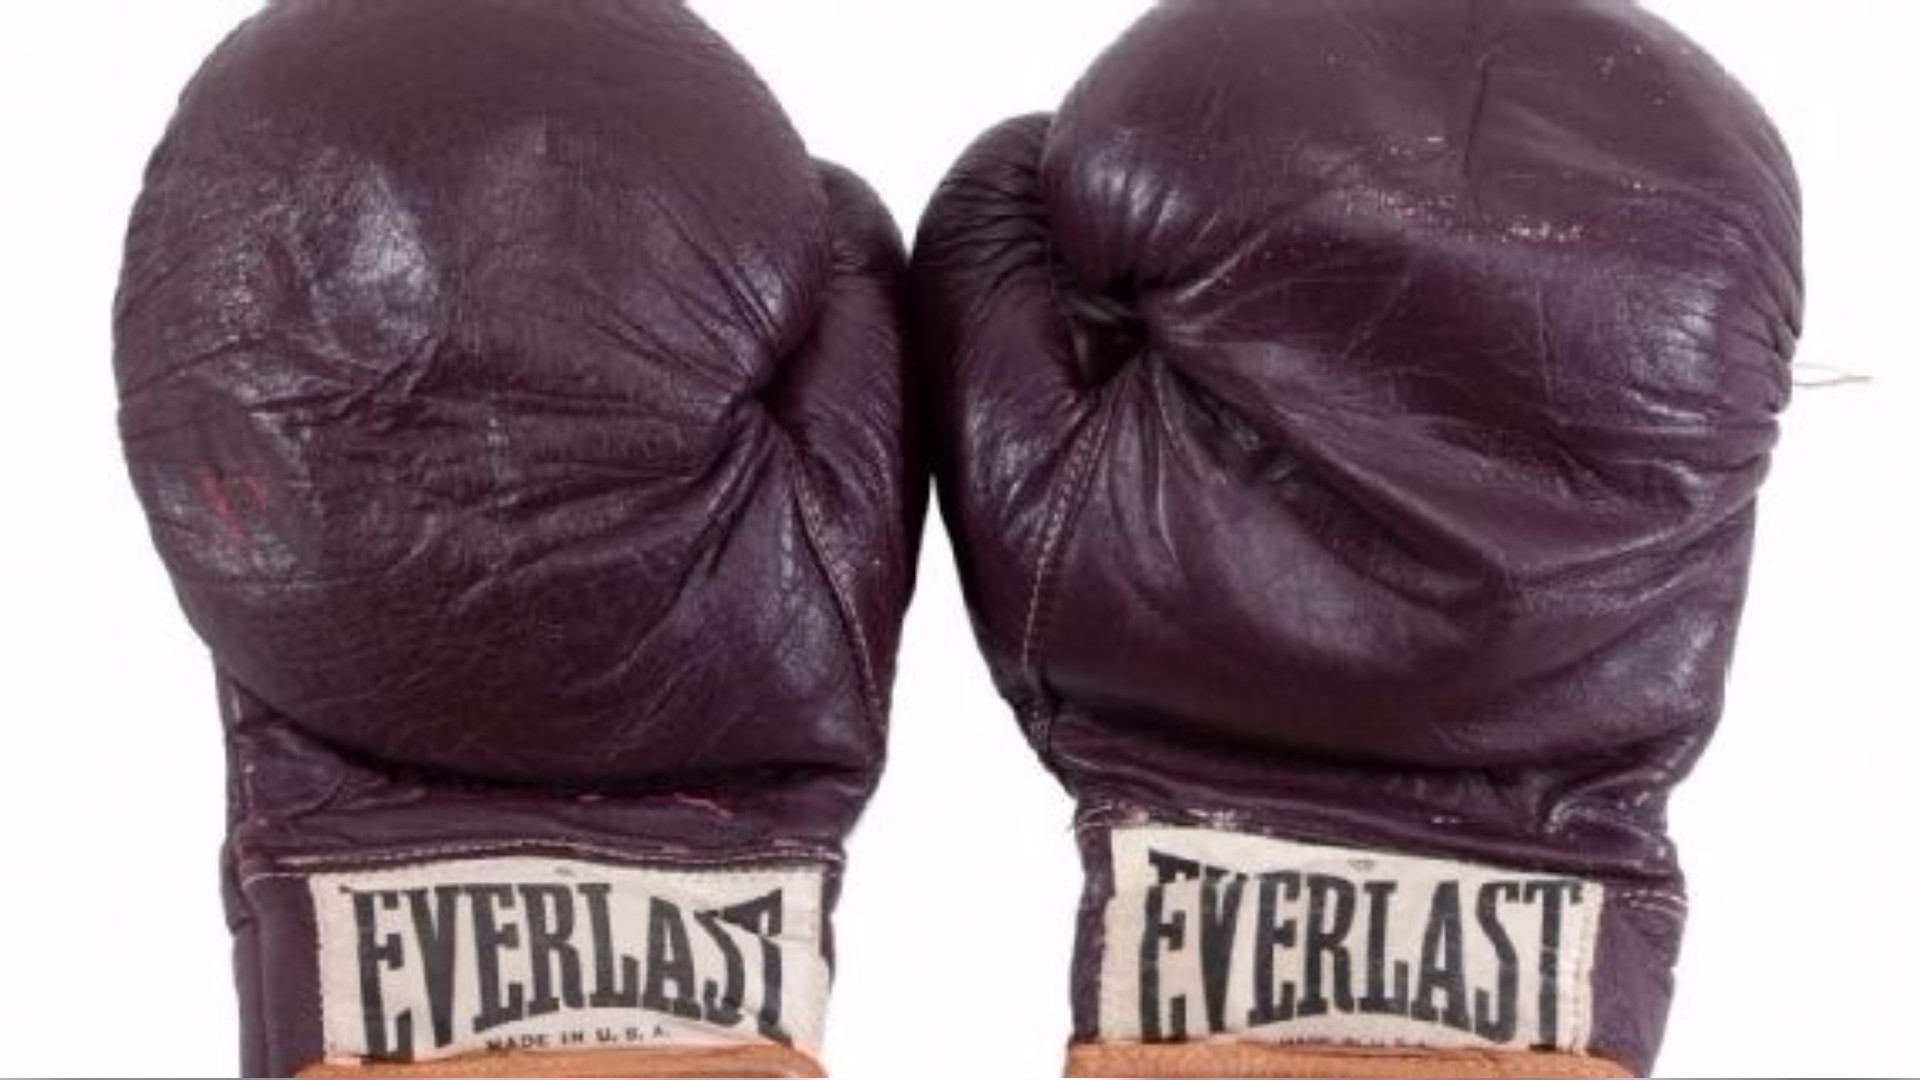 Muhammad Ali gloves fetch $606,375 in auction